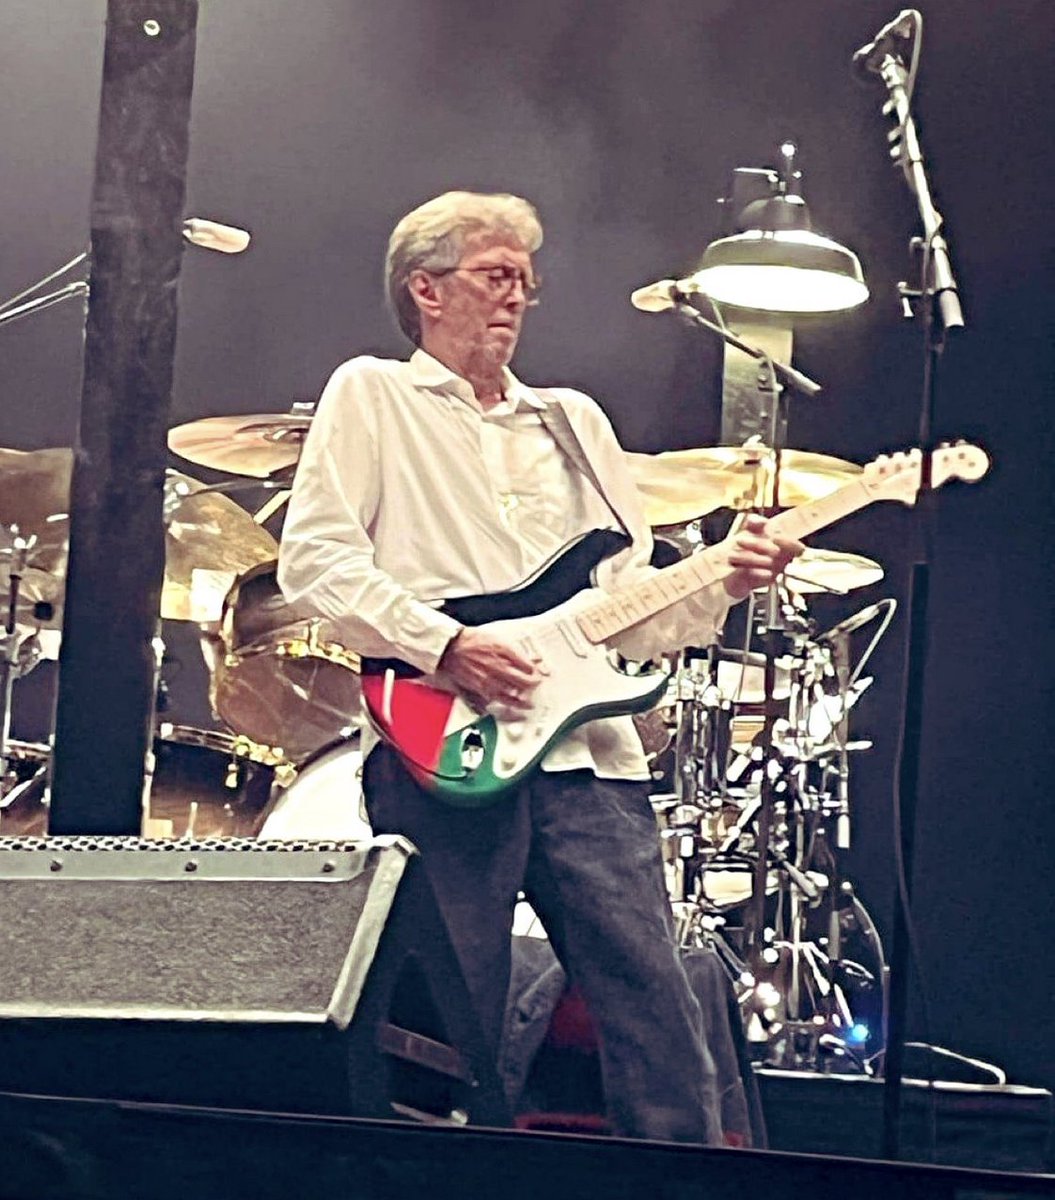 Eric Clapton is playing a guitar adorned with the Palestinian flag on his current tour. Many people don't know that in 1976, Clapton was the spark for Rock Against Racism when he urged people to 'get the foreigners out' and 'keep Britain white' during a concert in Birmingham.